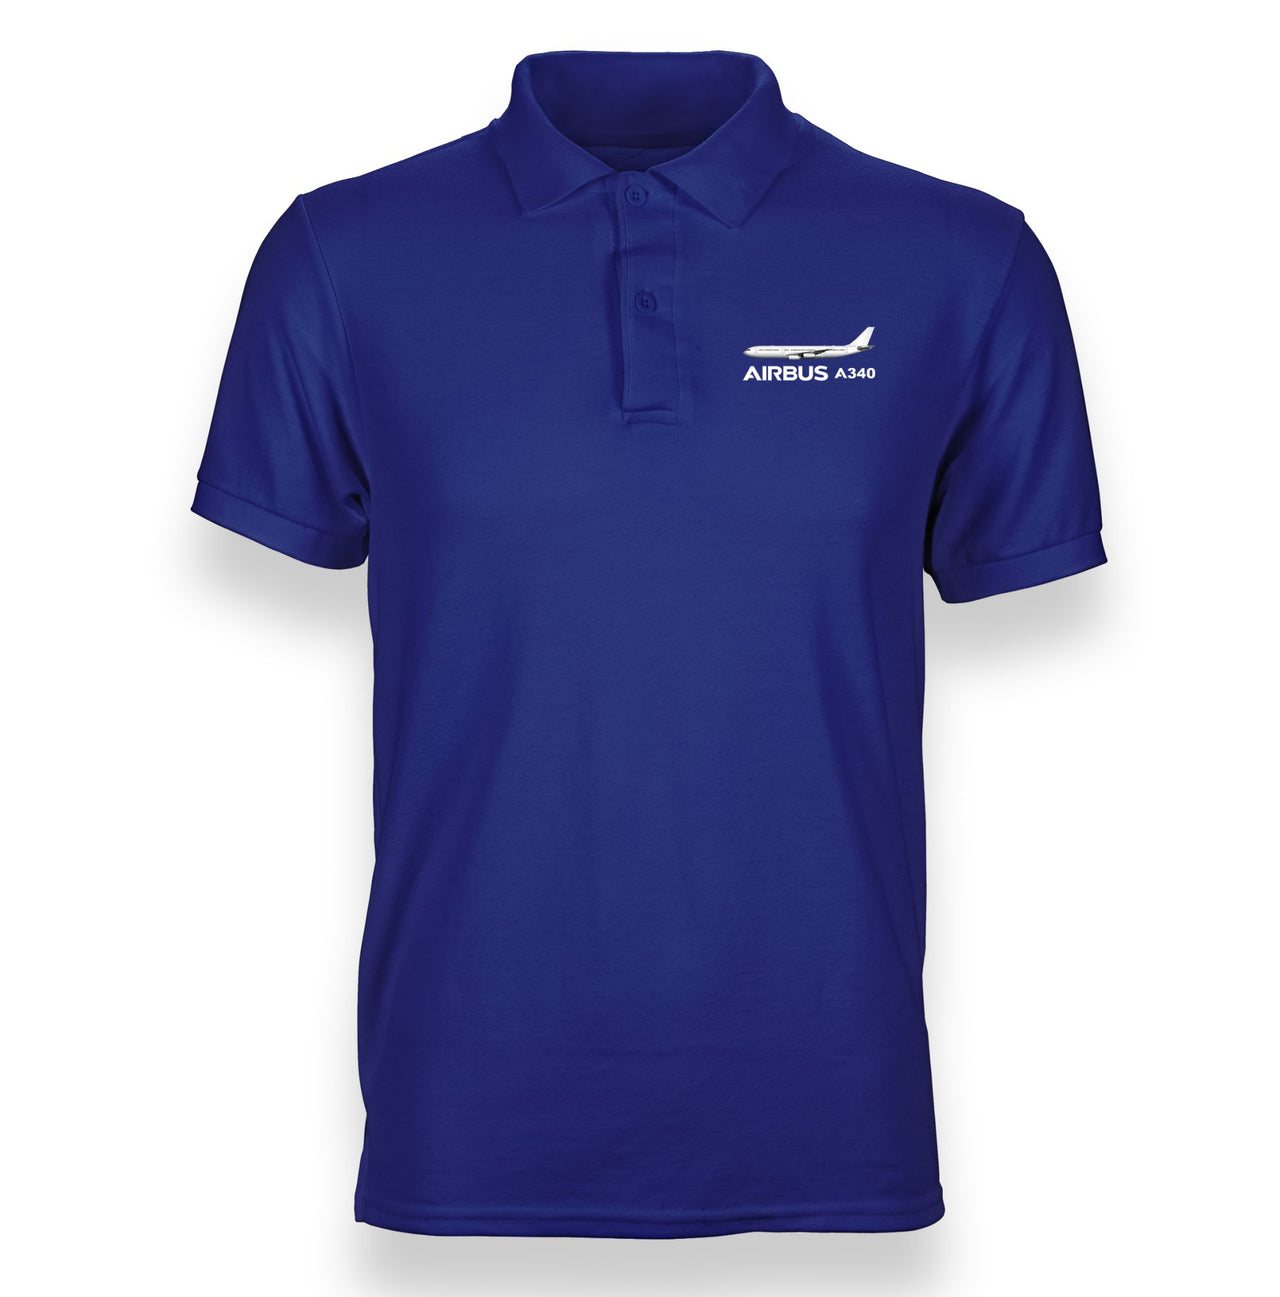 The Airbus A340 Designed "WOMEN" Polo T-Shirts